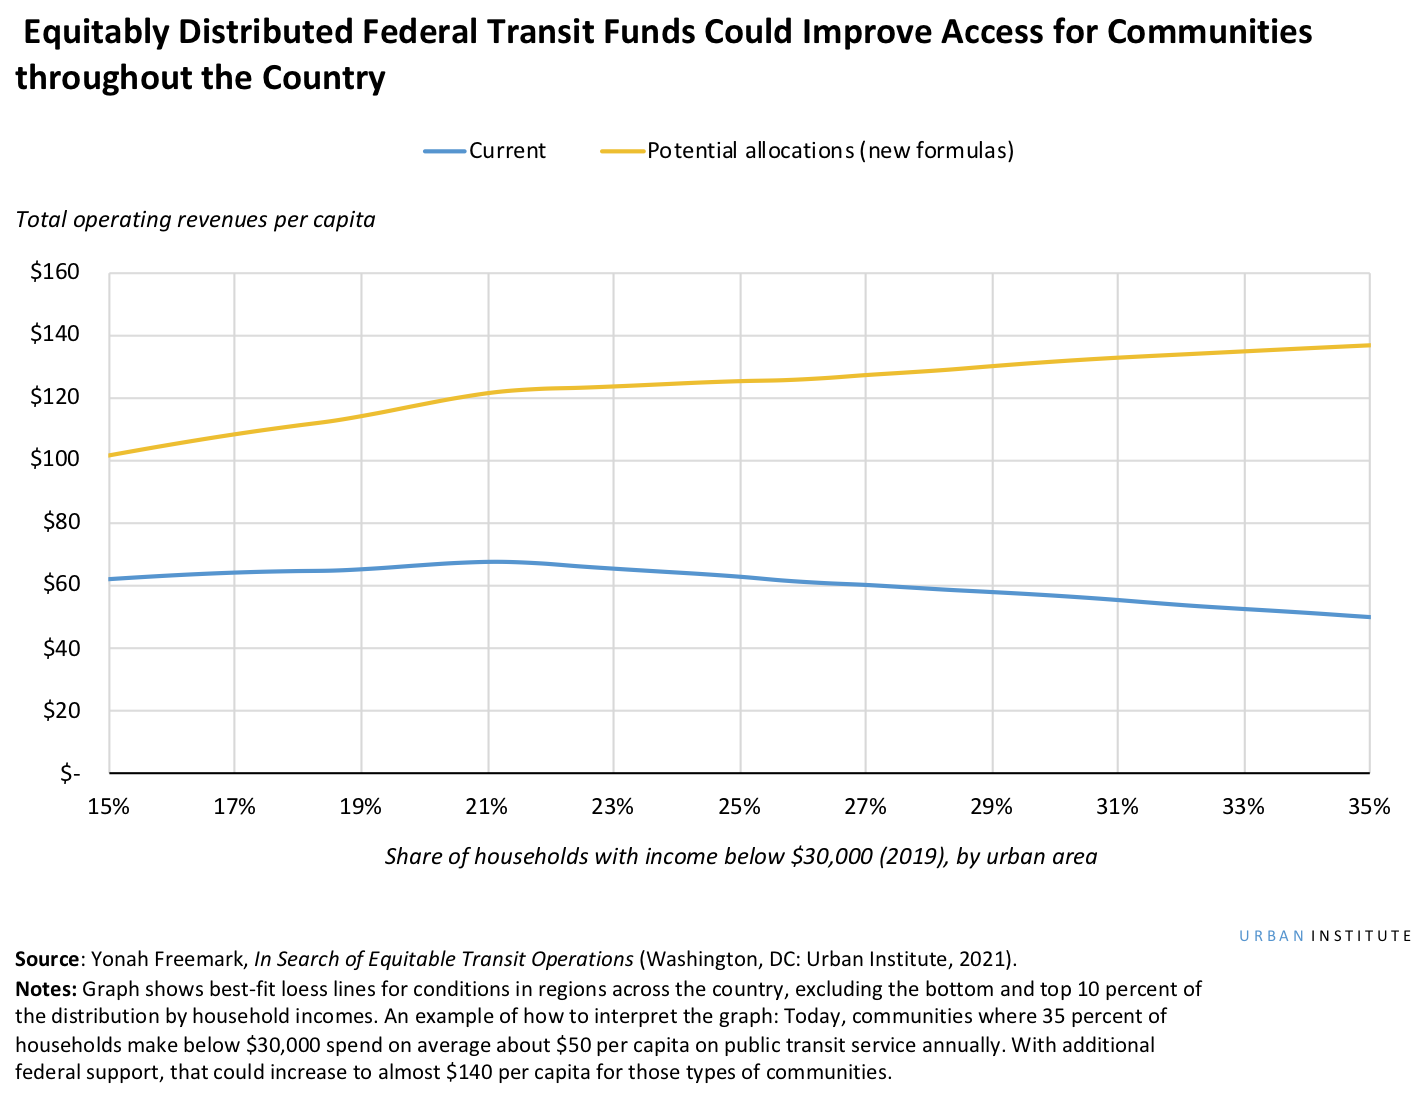 Line chart showing equitably distributed federal transit funds could improve access for communities throughout the country 